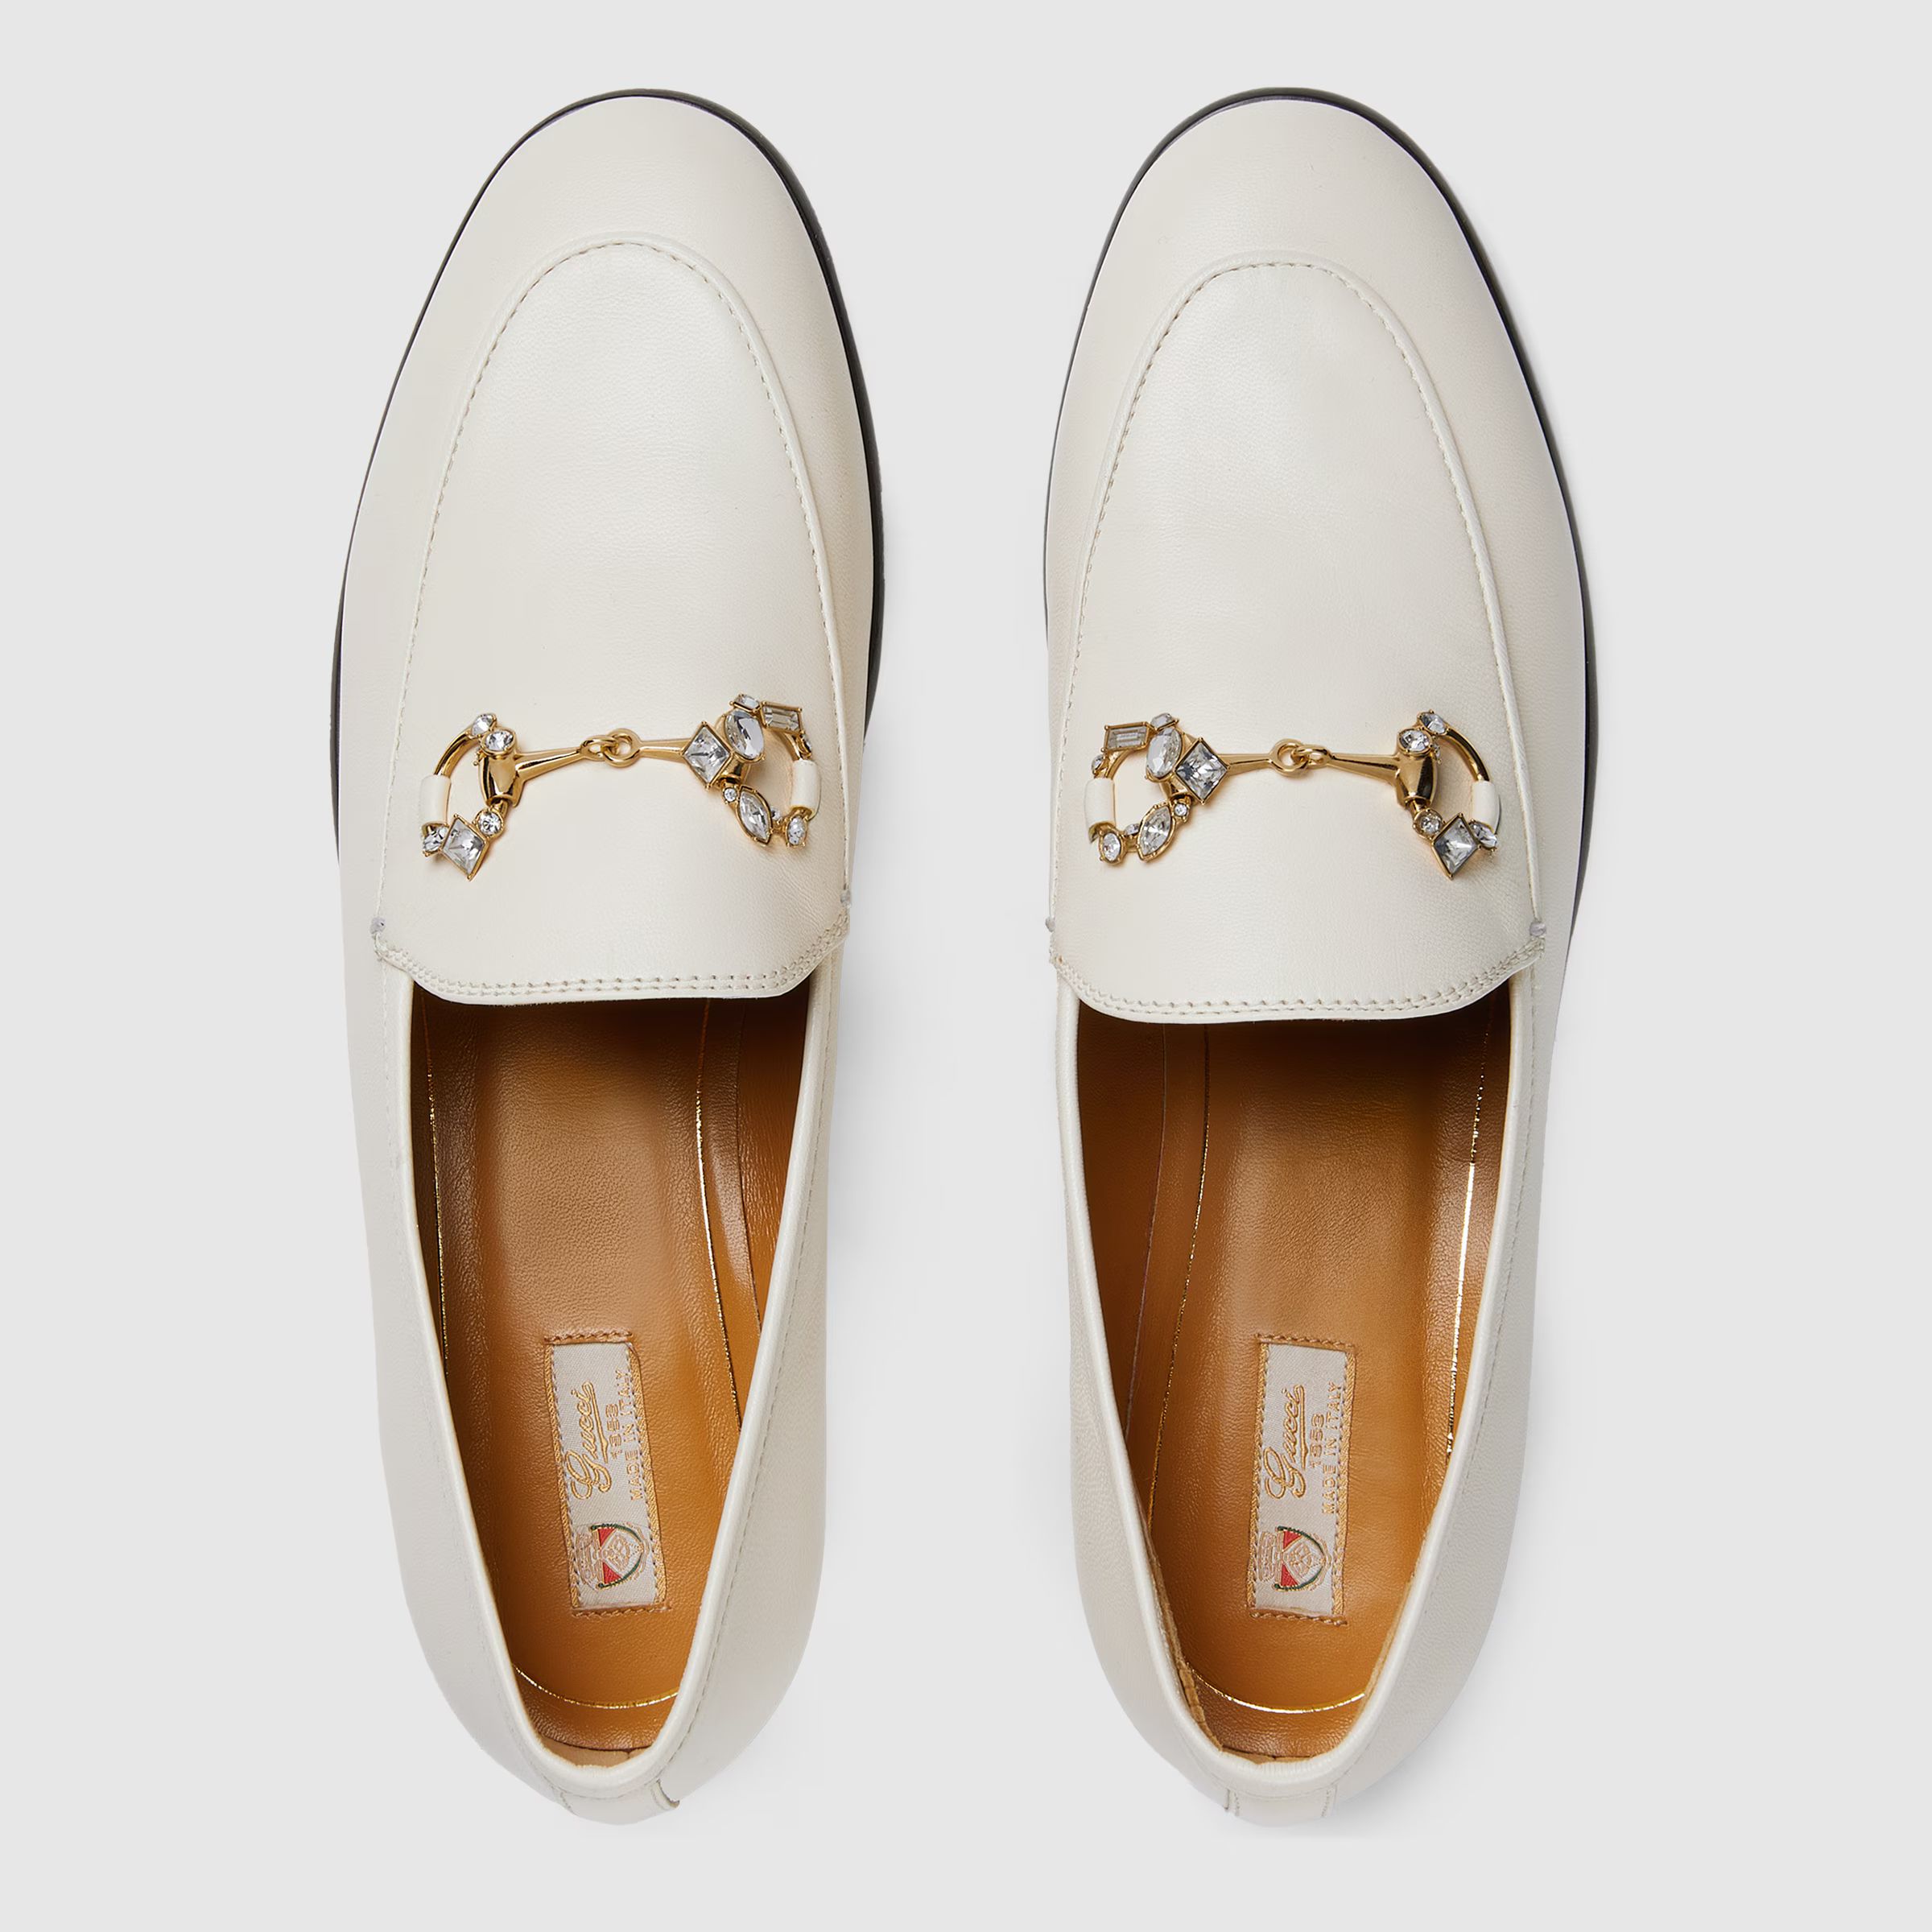 Women's Gucci Jordaan loafer



        
            $ 1,090 | Gucci (US)